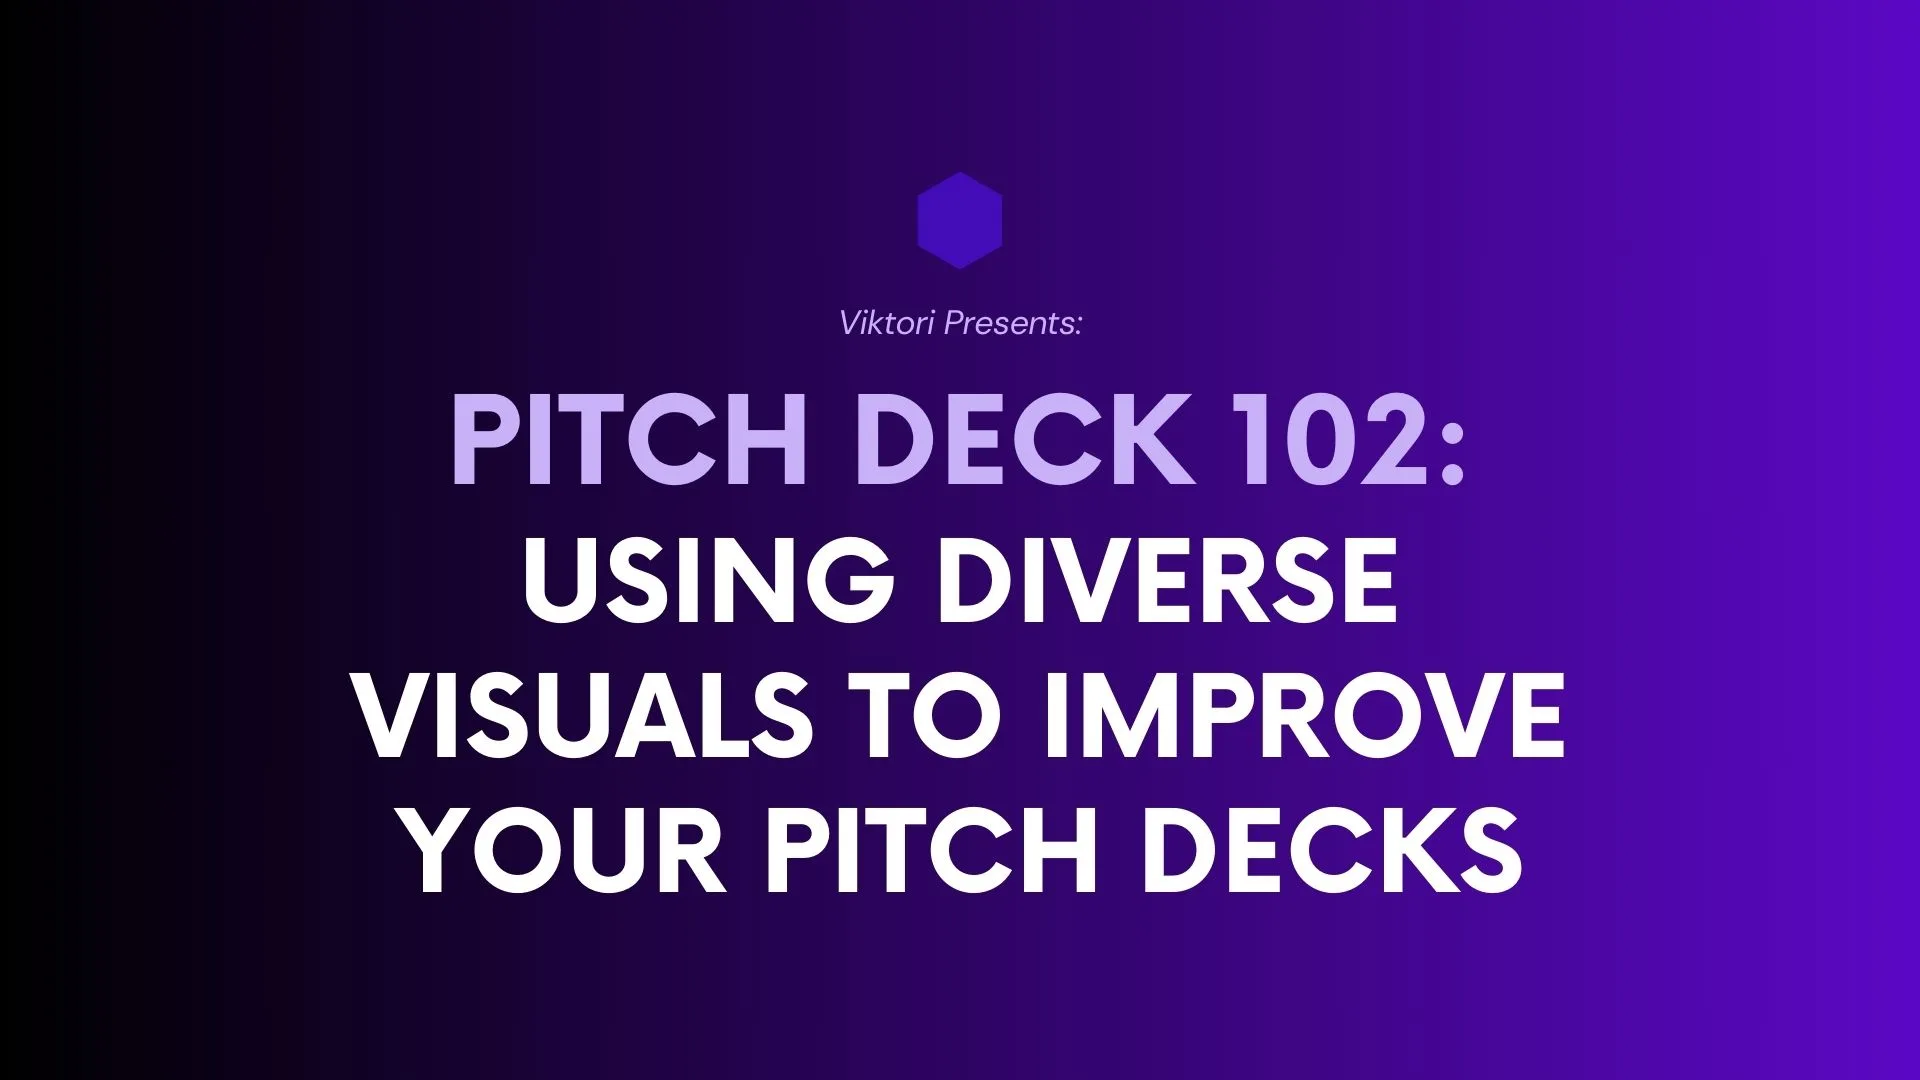 Using Diverse Visuals to Improve Your Pitch Decks